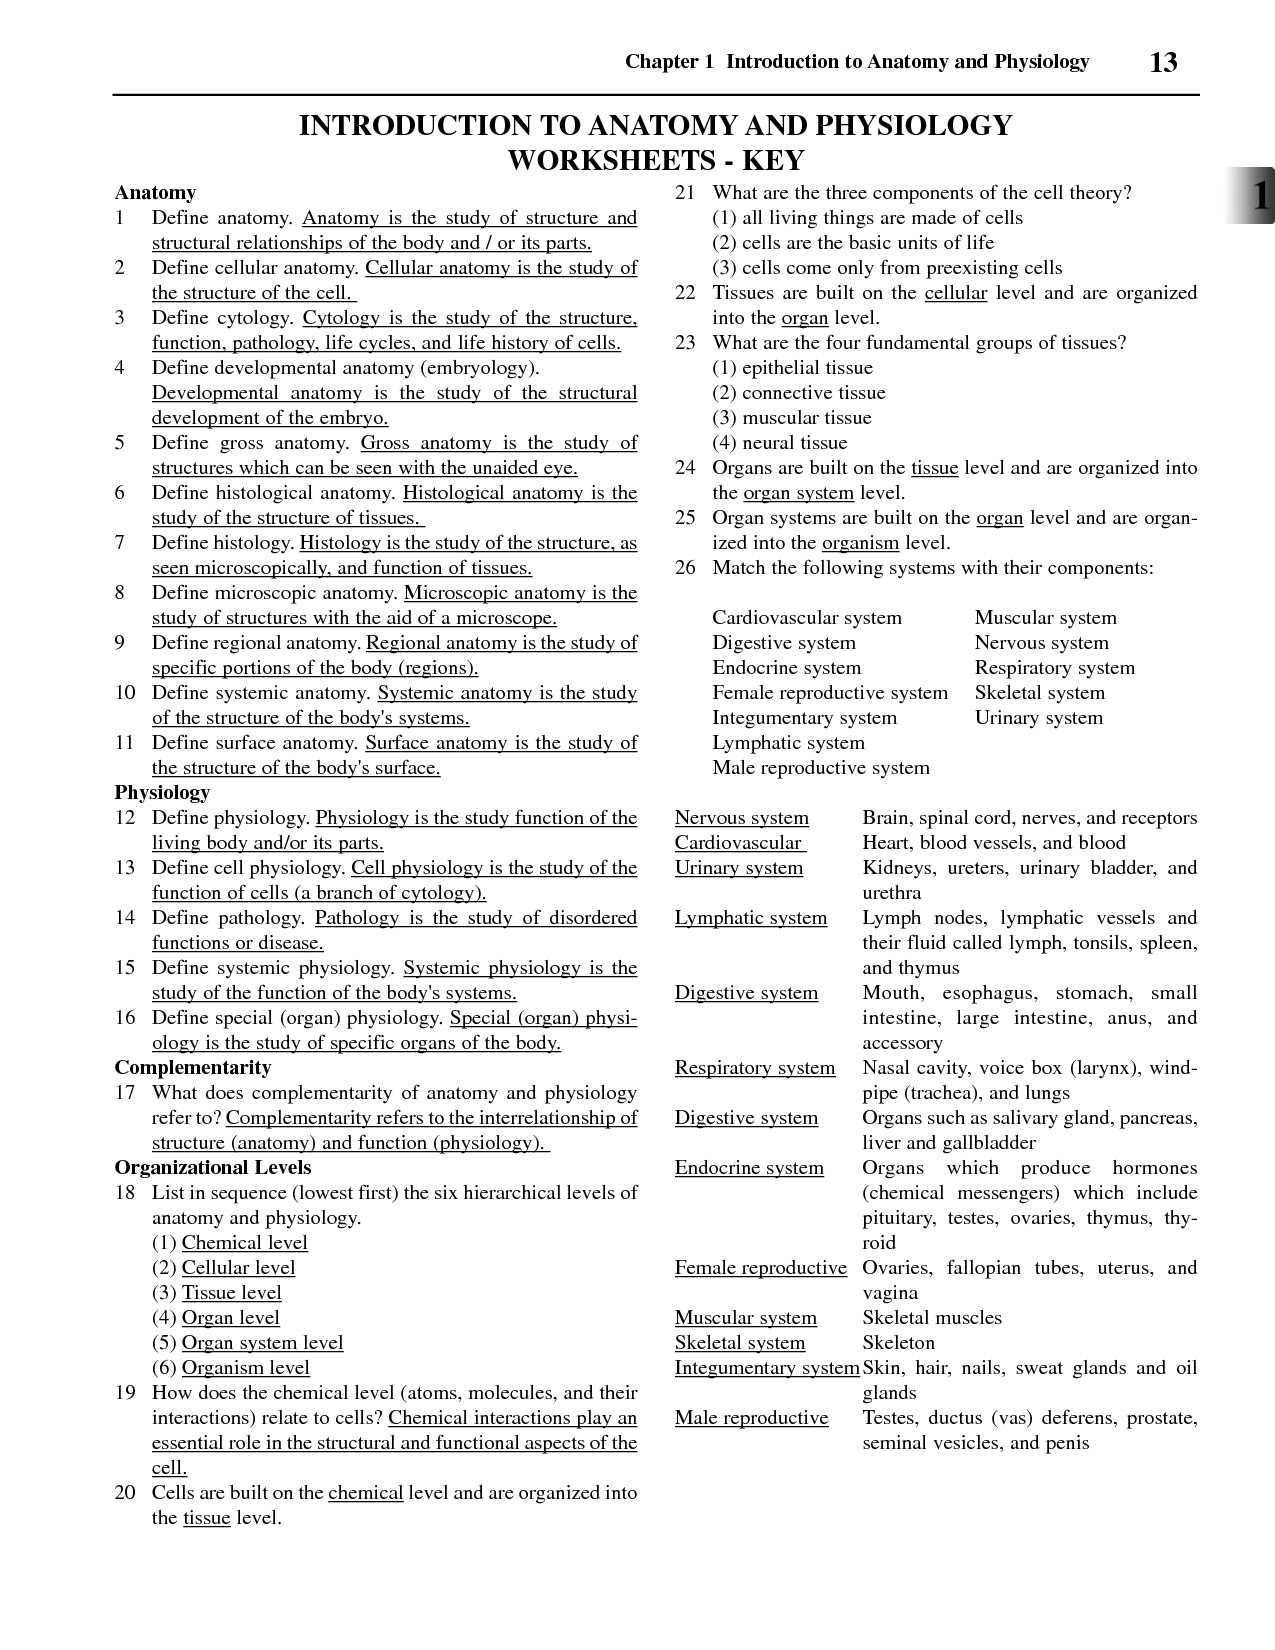 Factor Each Completely Worksheet Answers as Well as Ungewöhnlich High School Anatomy and Physiology Worksheets Galerie